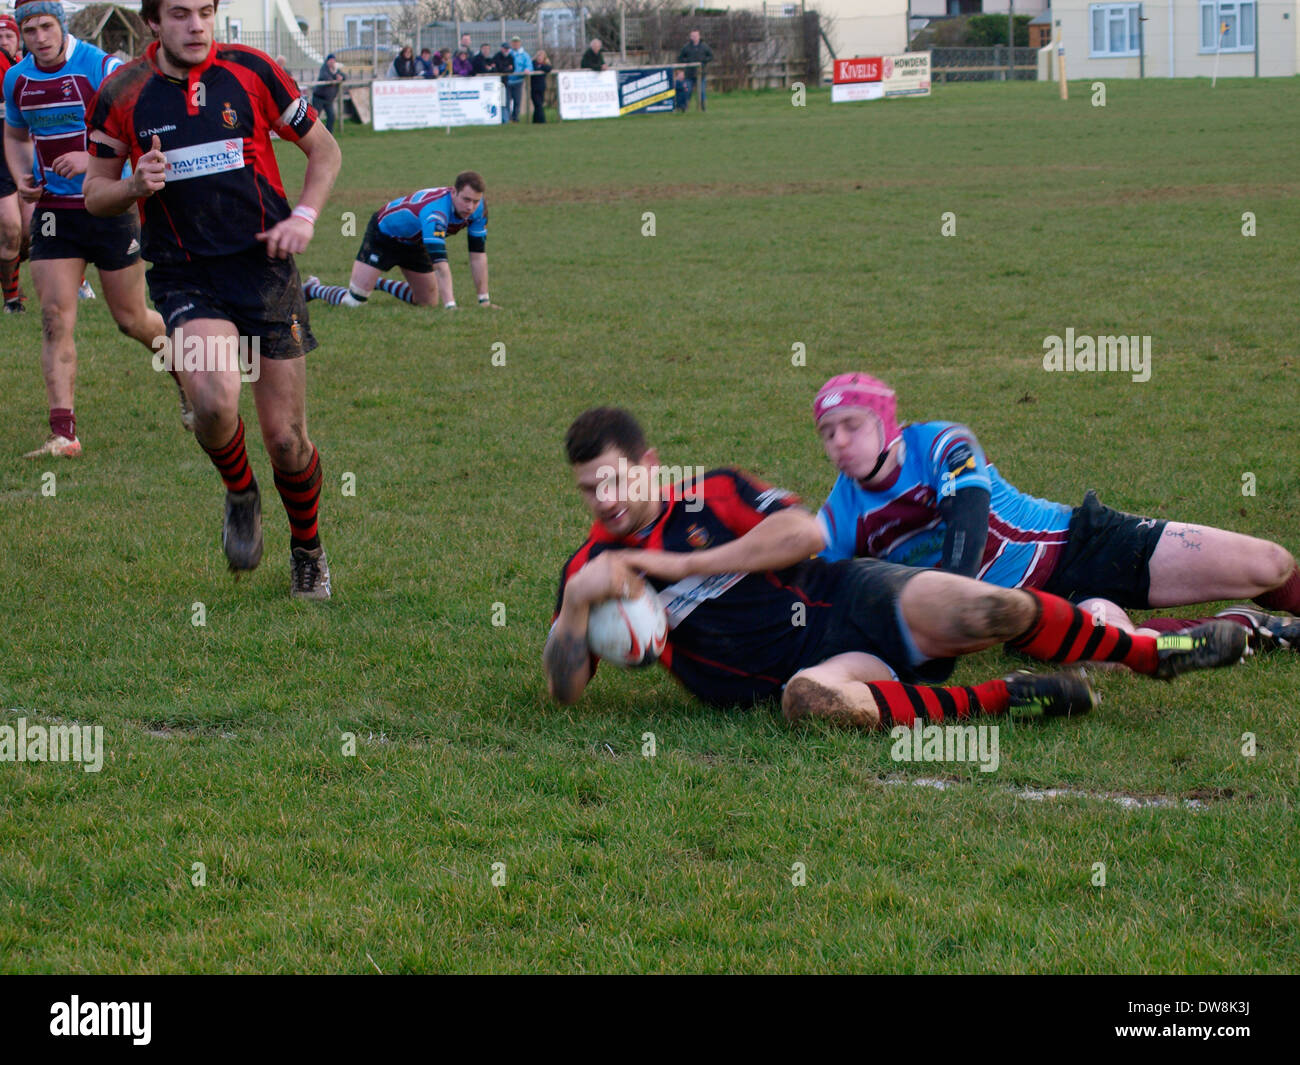 Amateur rugby player sliding over the line to score a try with motion blur, Bude, Cornwall, UK Stock Photo